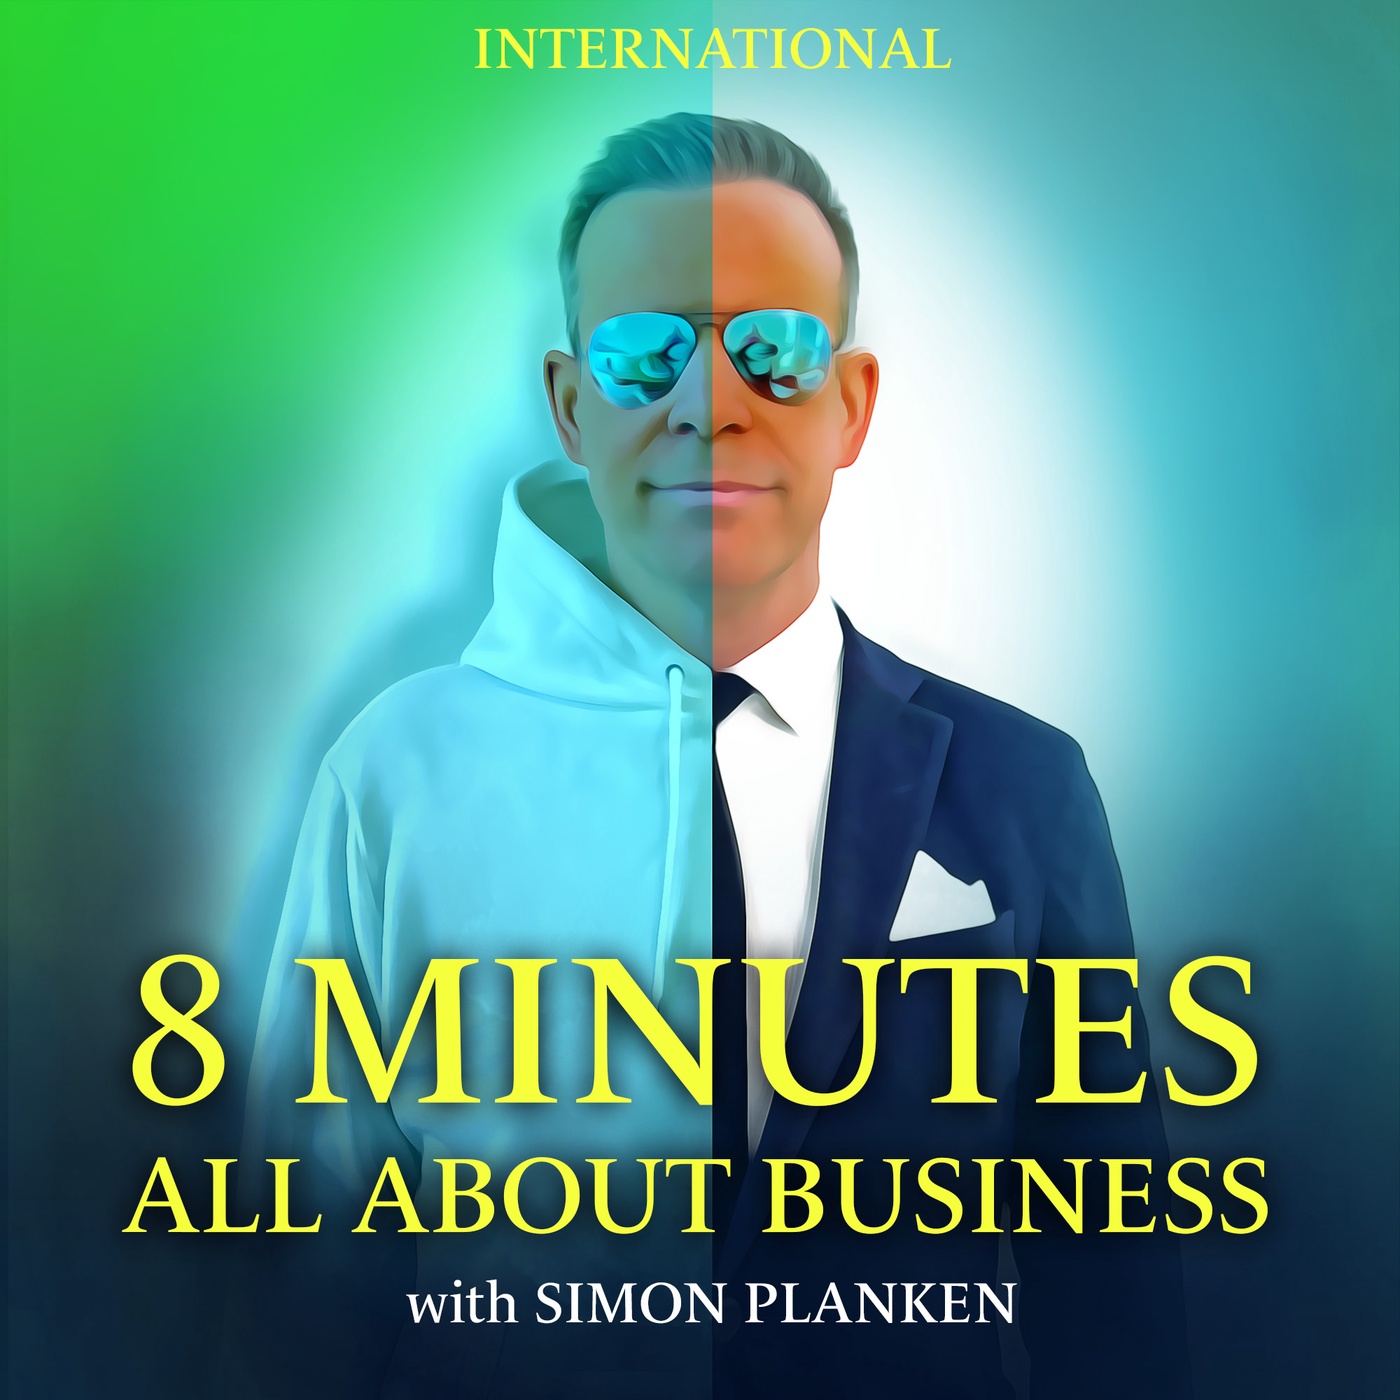 8 MINUTES ALL ABOUT BUSINESS - INTERNATIONAL